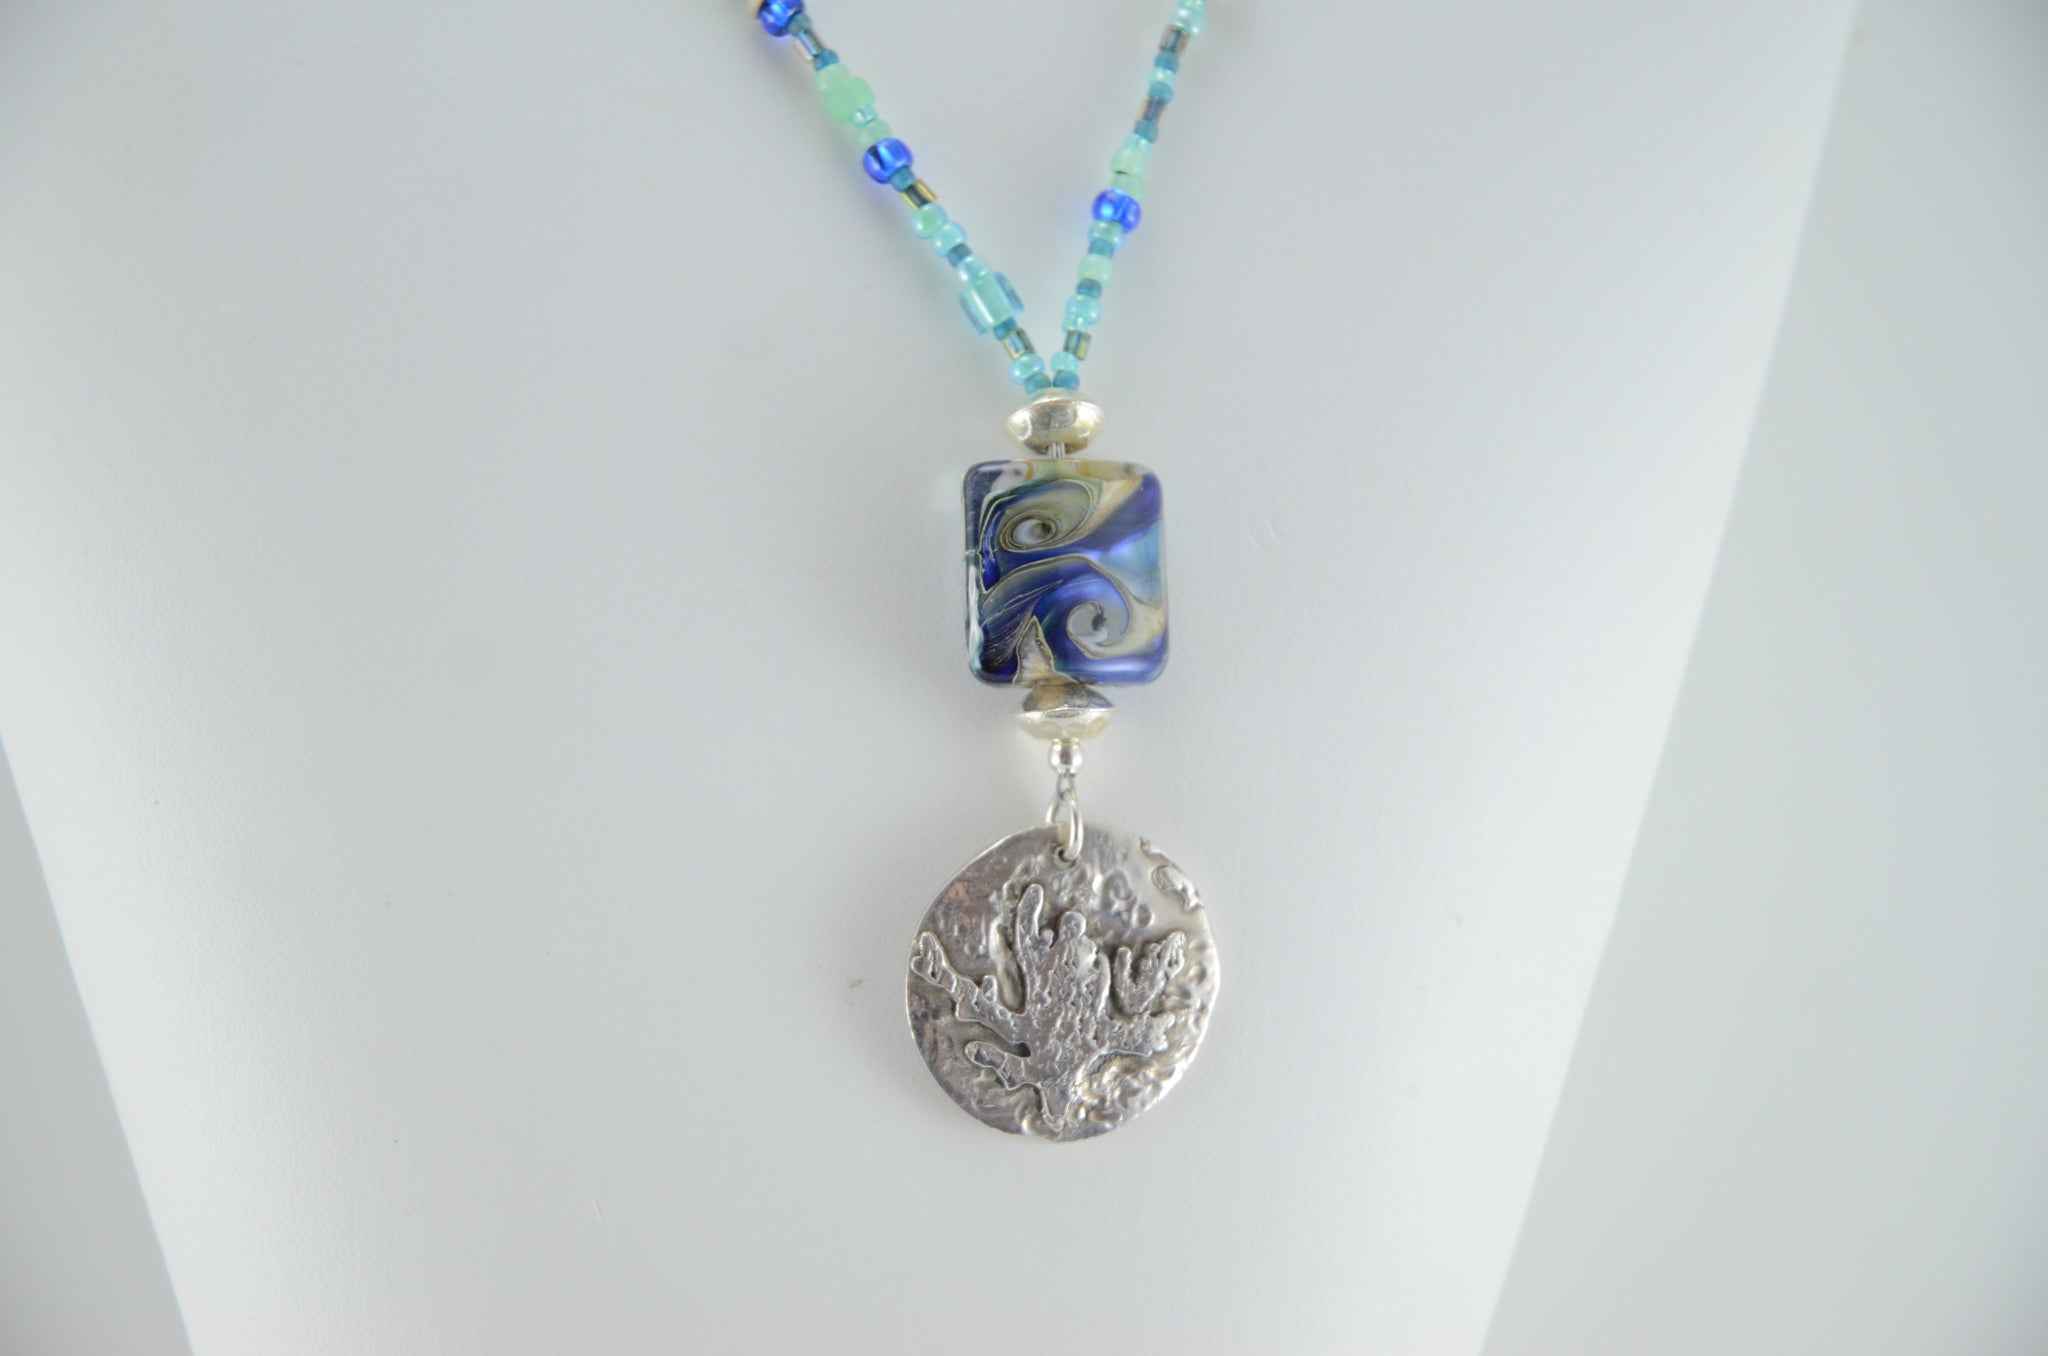 Cobalt Blue Lampwork Pendant Necklace with Silver Coral Charm